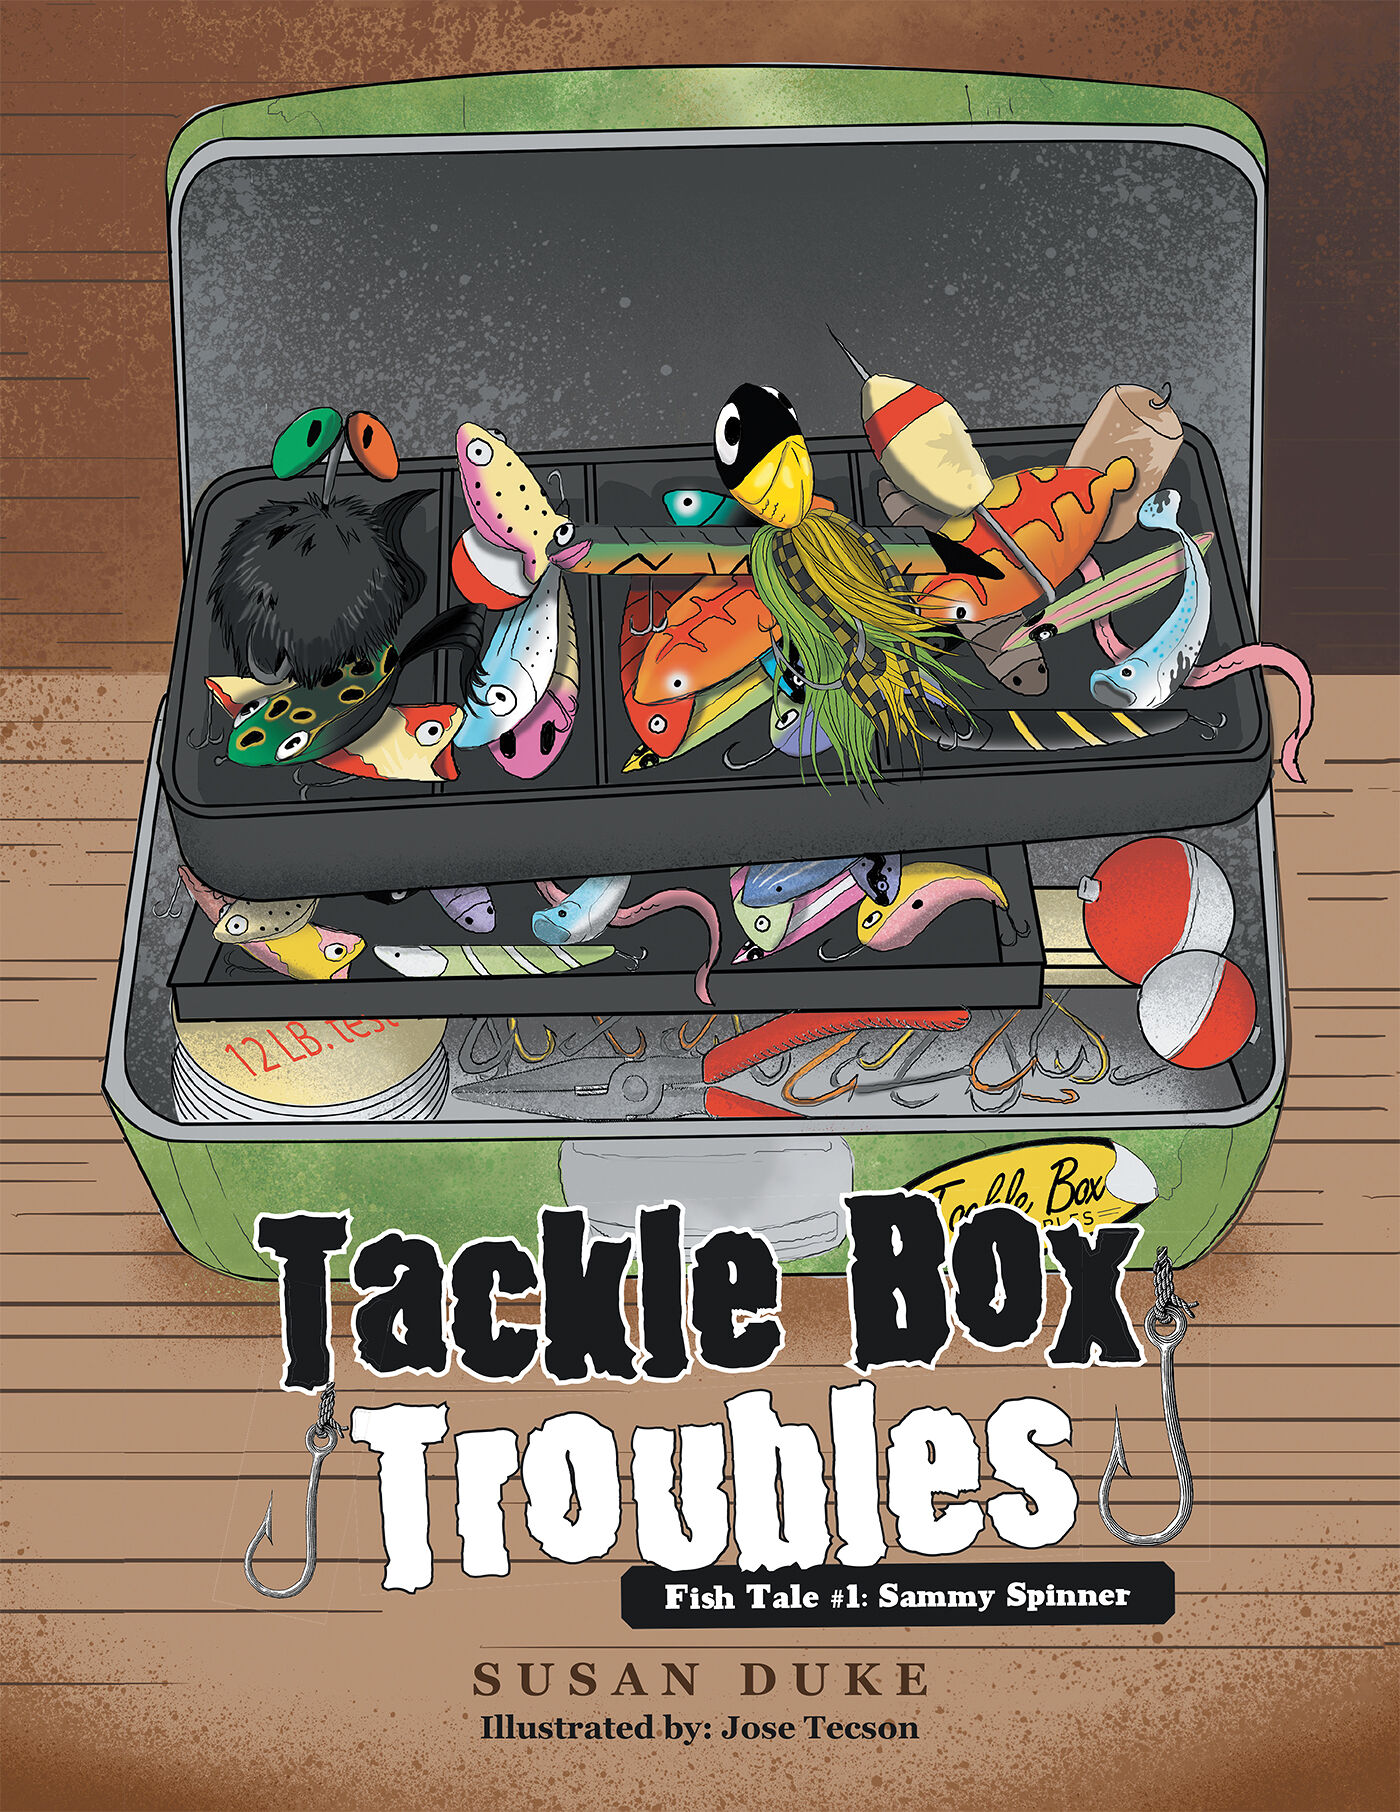 Tackle Box Troubles by Susan Duke